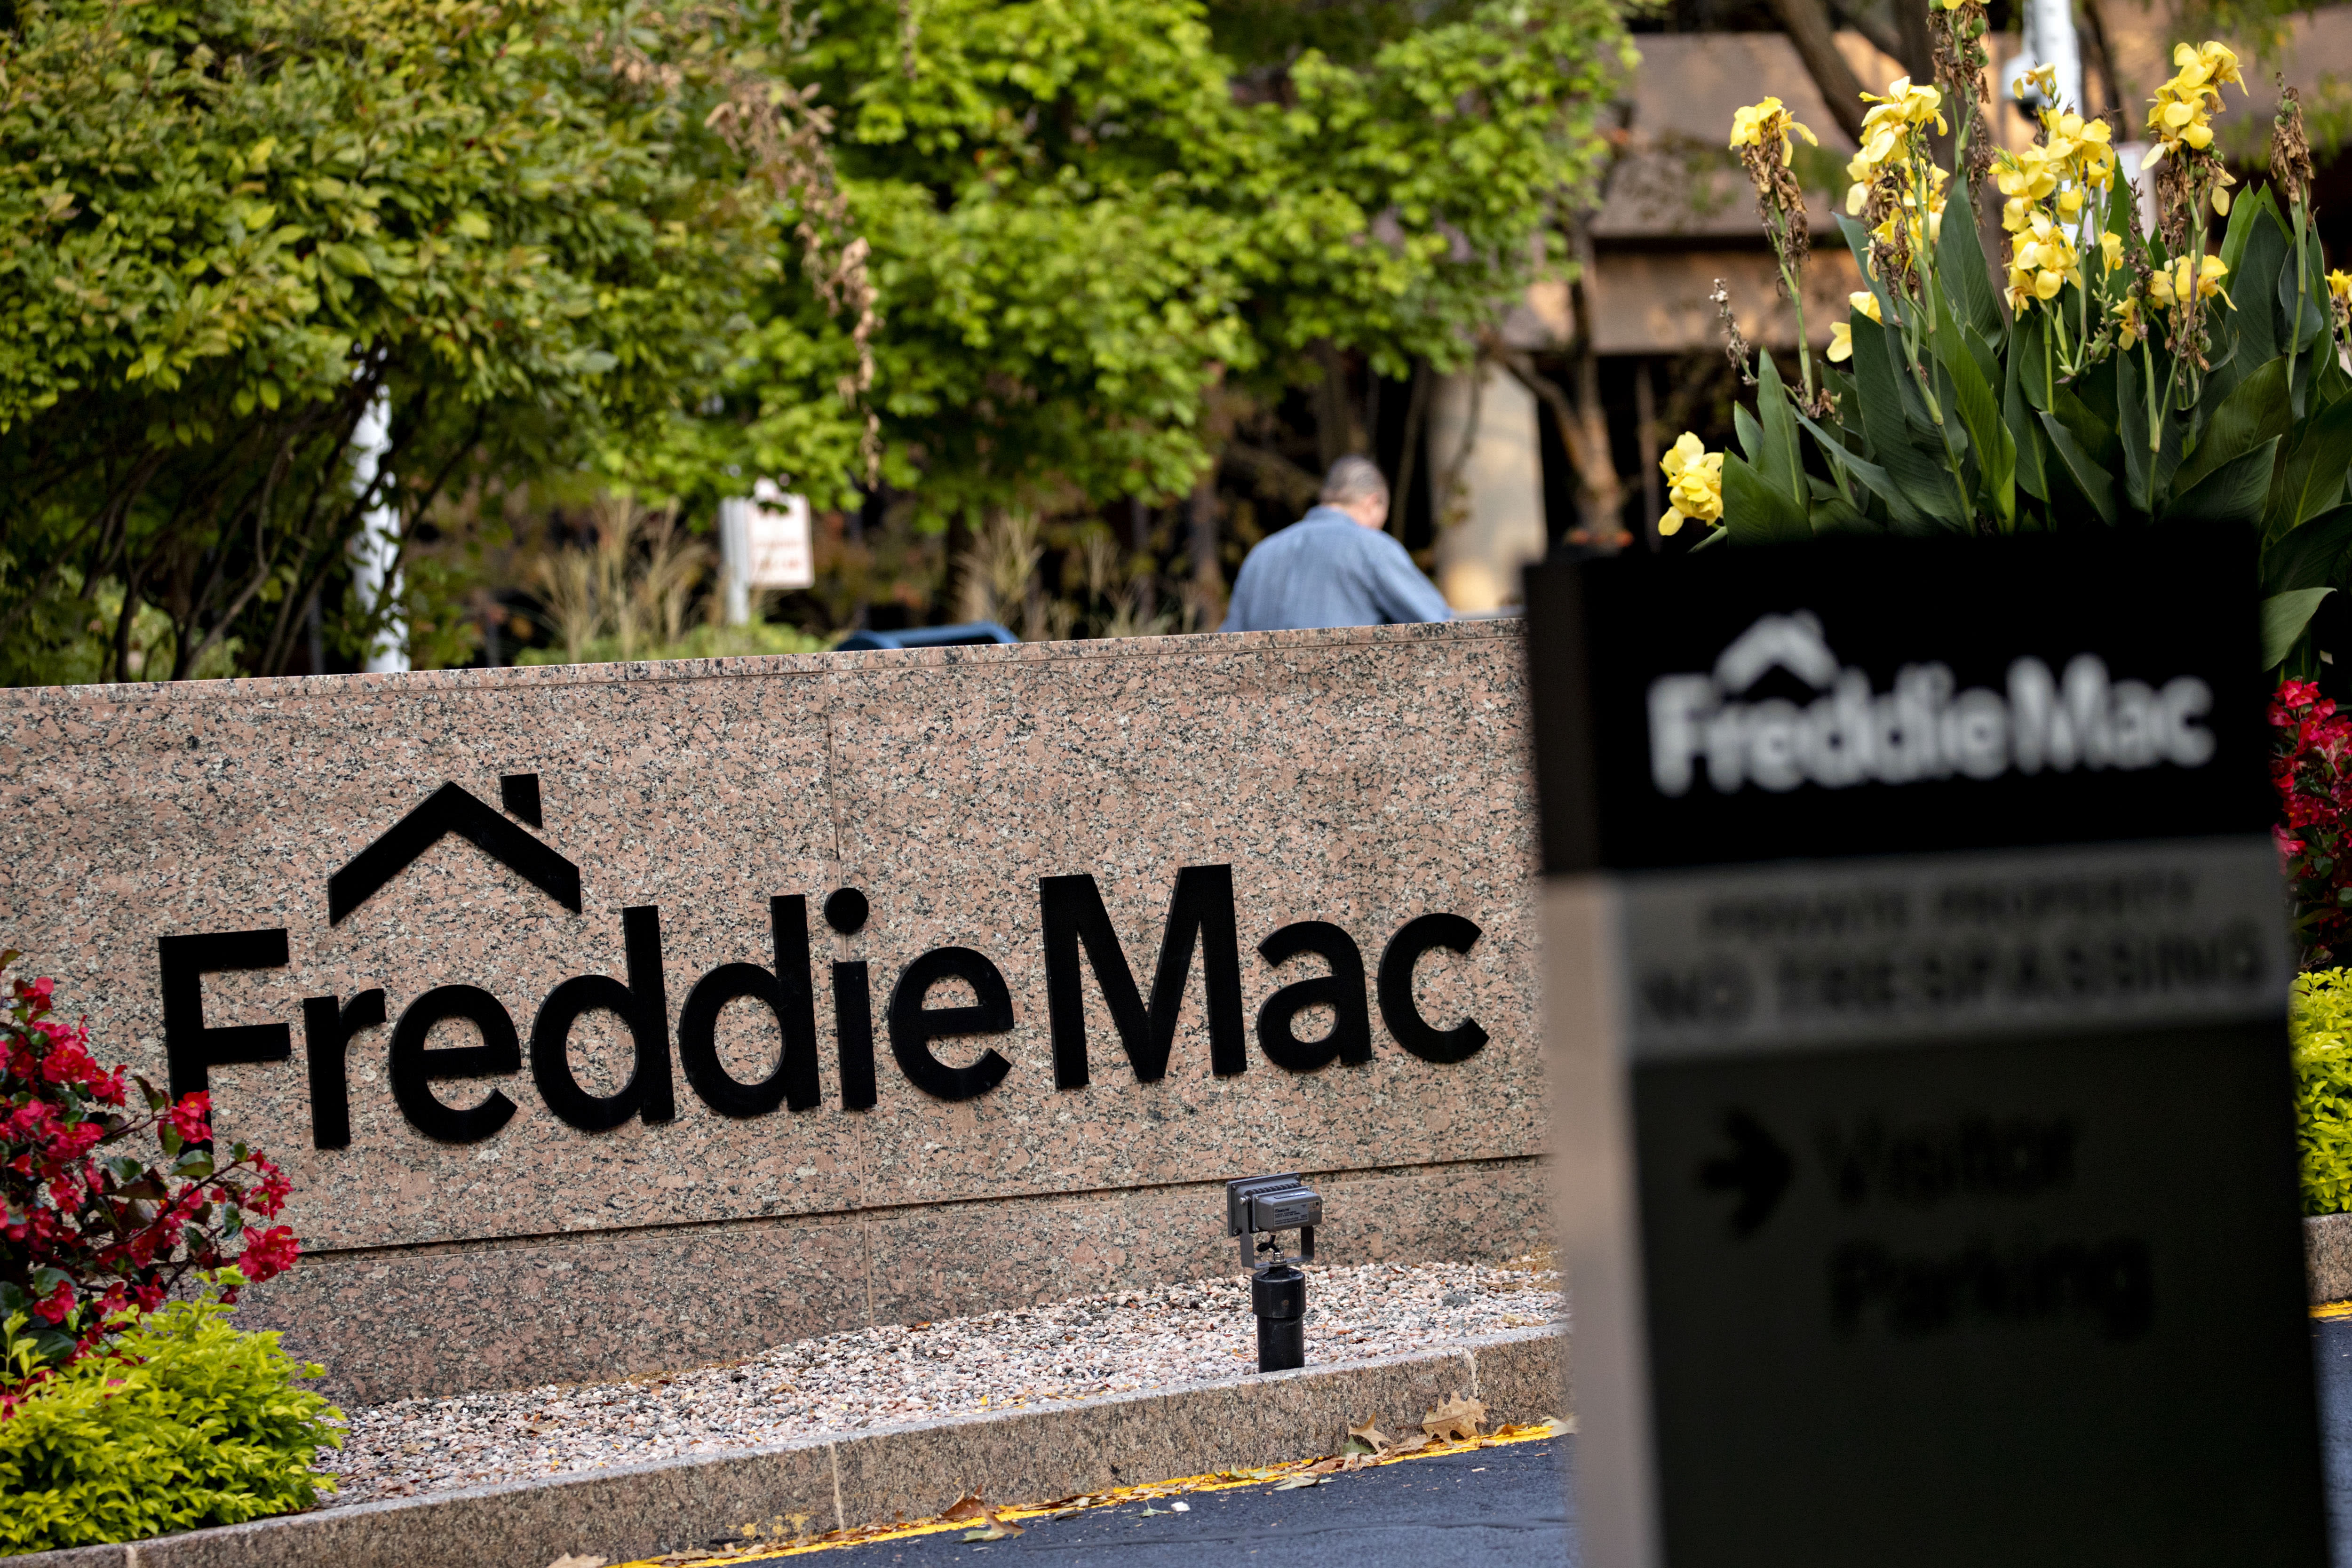 Freddie Mac offers early retirement to 25% of workforce: Sources.